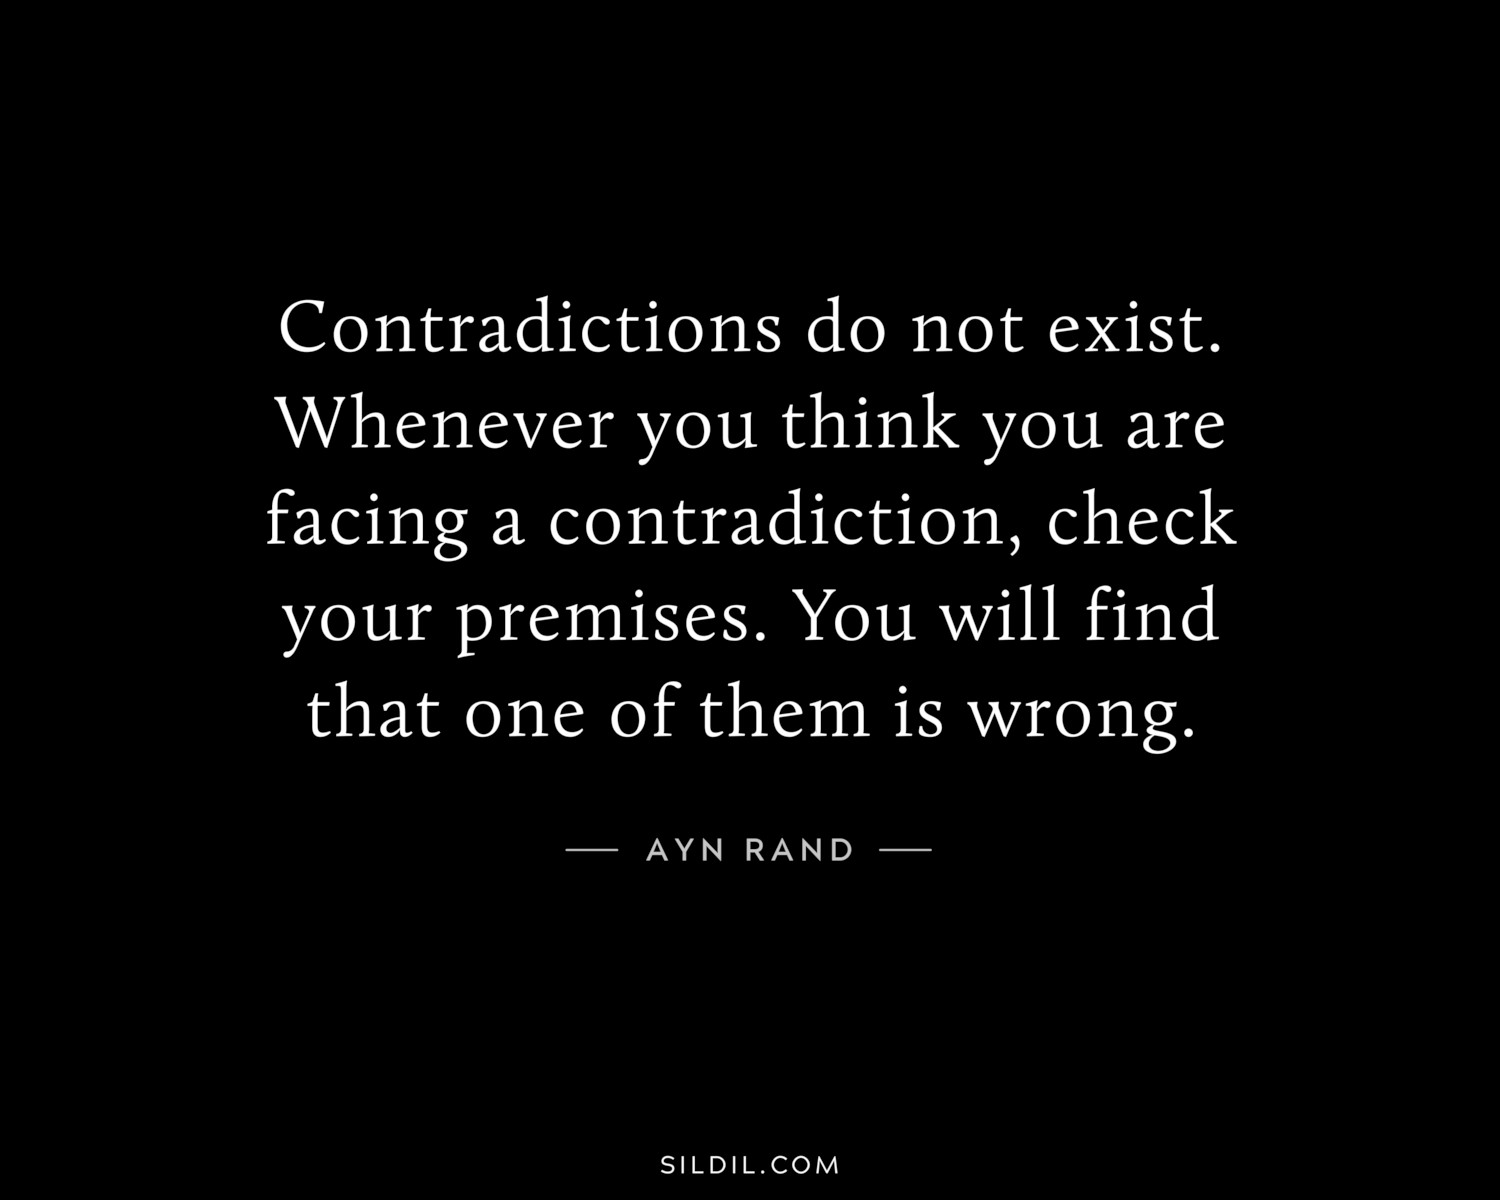 Contradictions do not exist. Whenever you think you are facing a contradiction, check your premises. You will find that one of them is wrong.